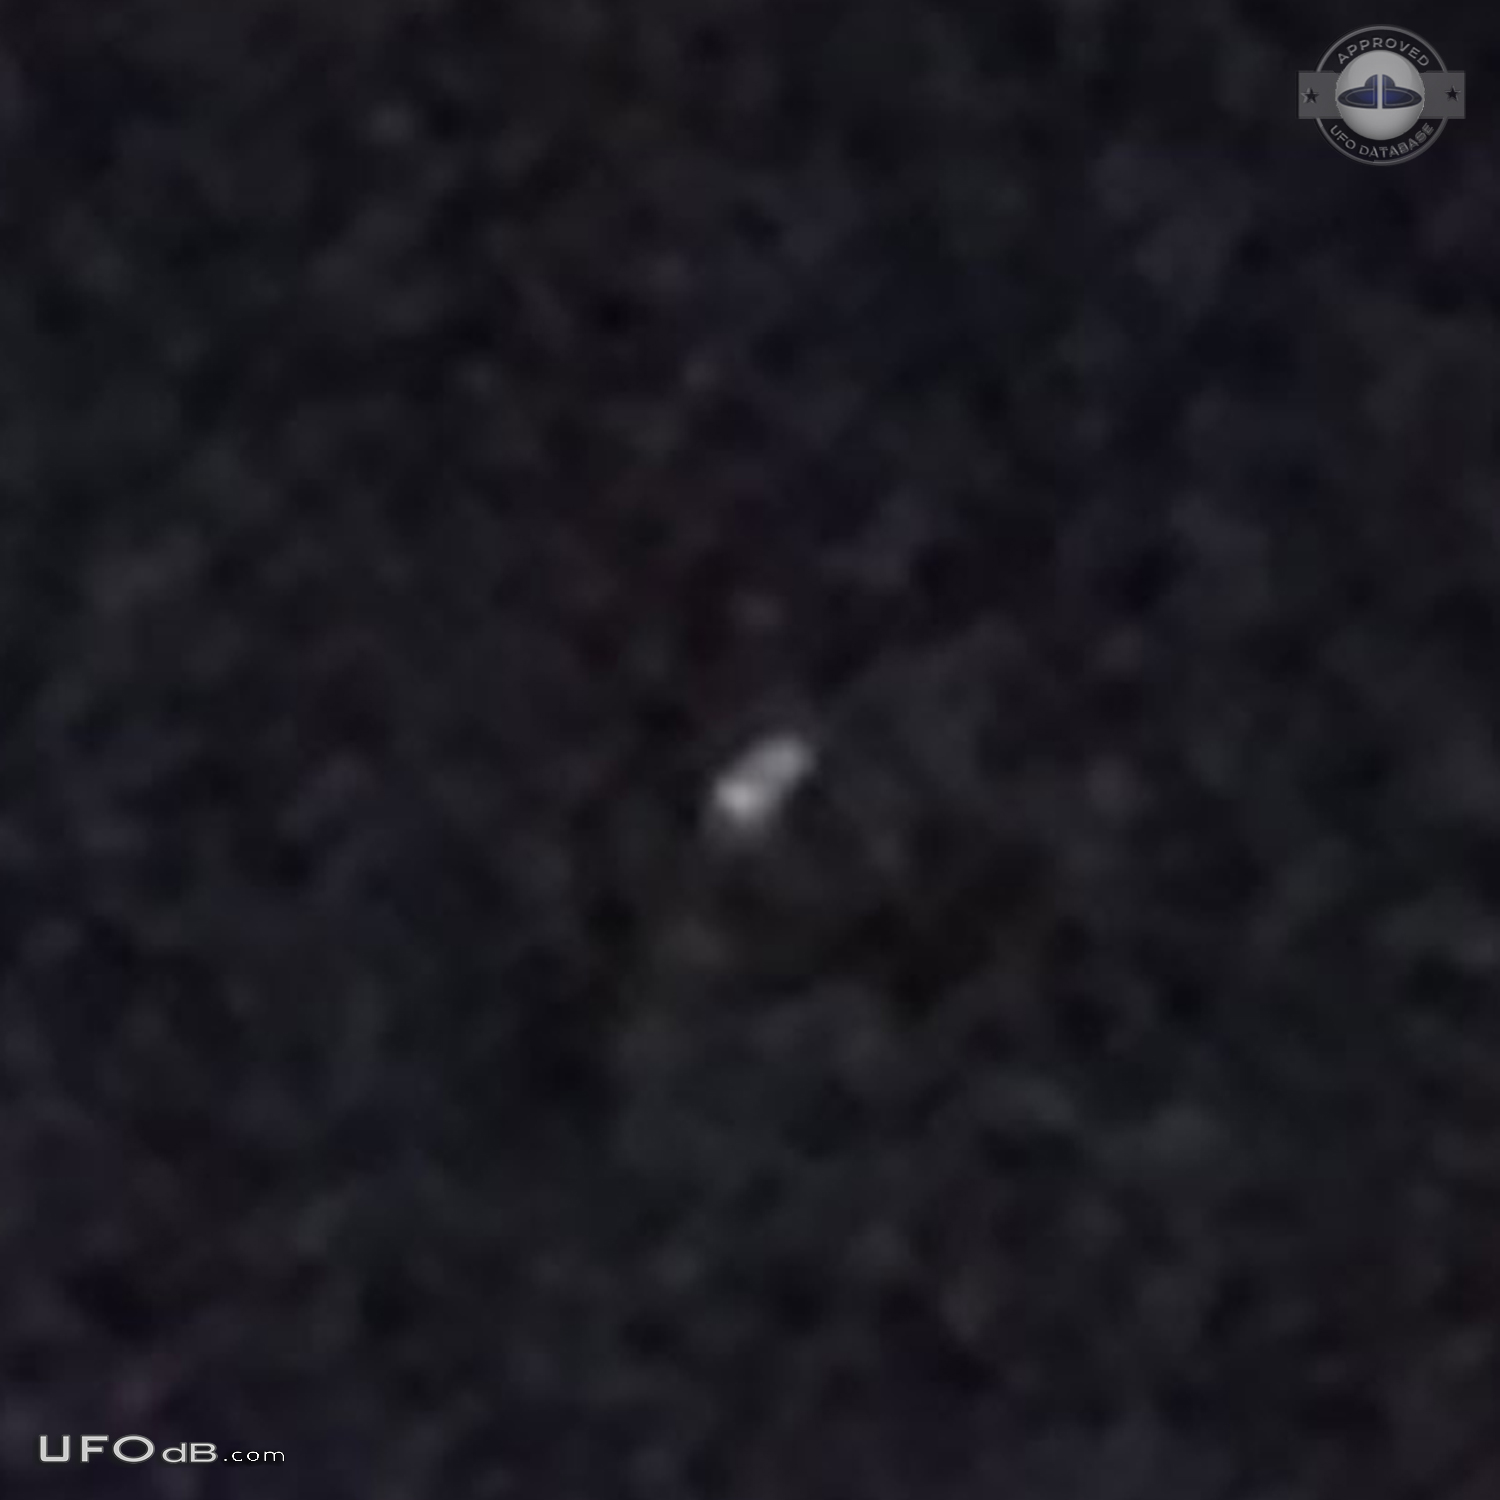 UFO first seen on 16 then seen again 17 oct 2015 - Providence Village  UFO Picture #733-5